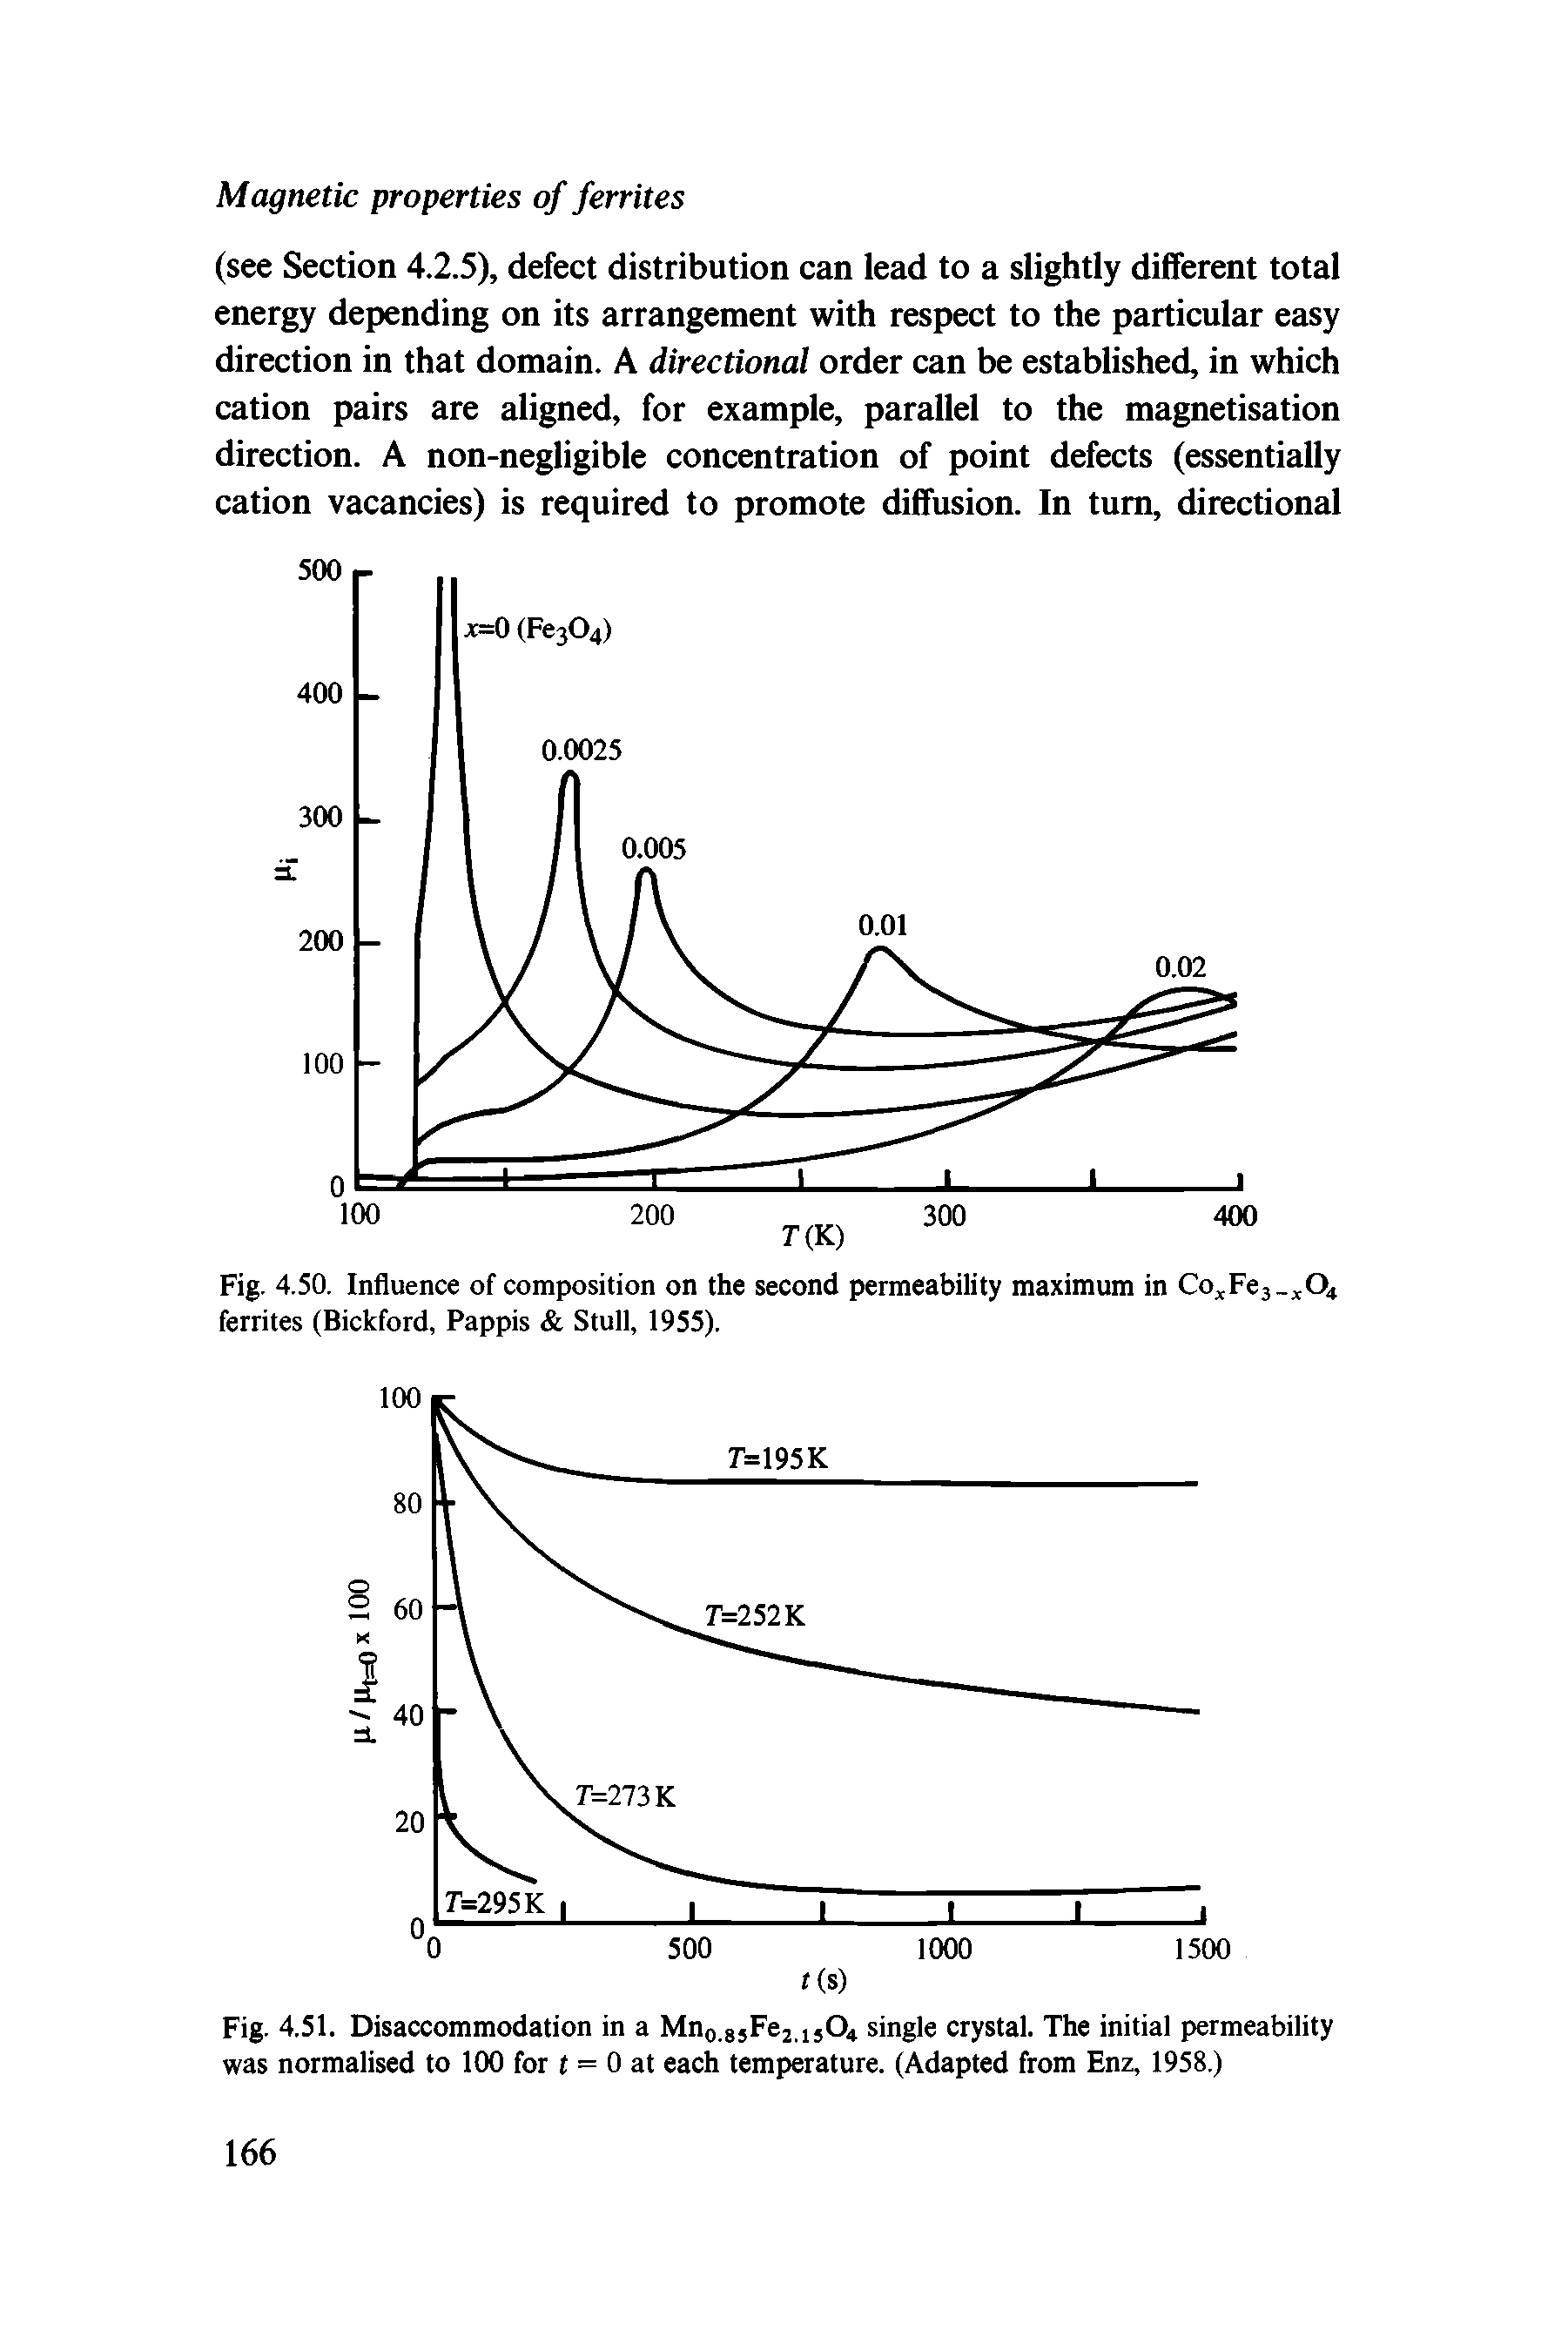 Fig. 4.50. Influence of composition on the second permeability maximum in Co Fej- tOt, ferrites (Bickford, Pappis Stull, 1955).